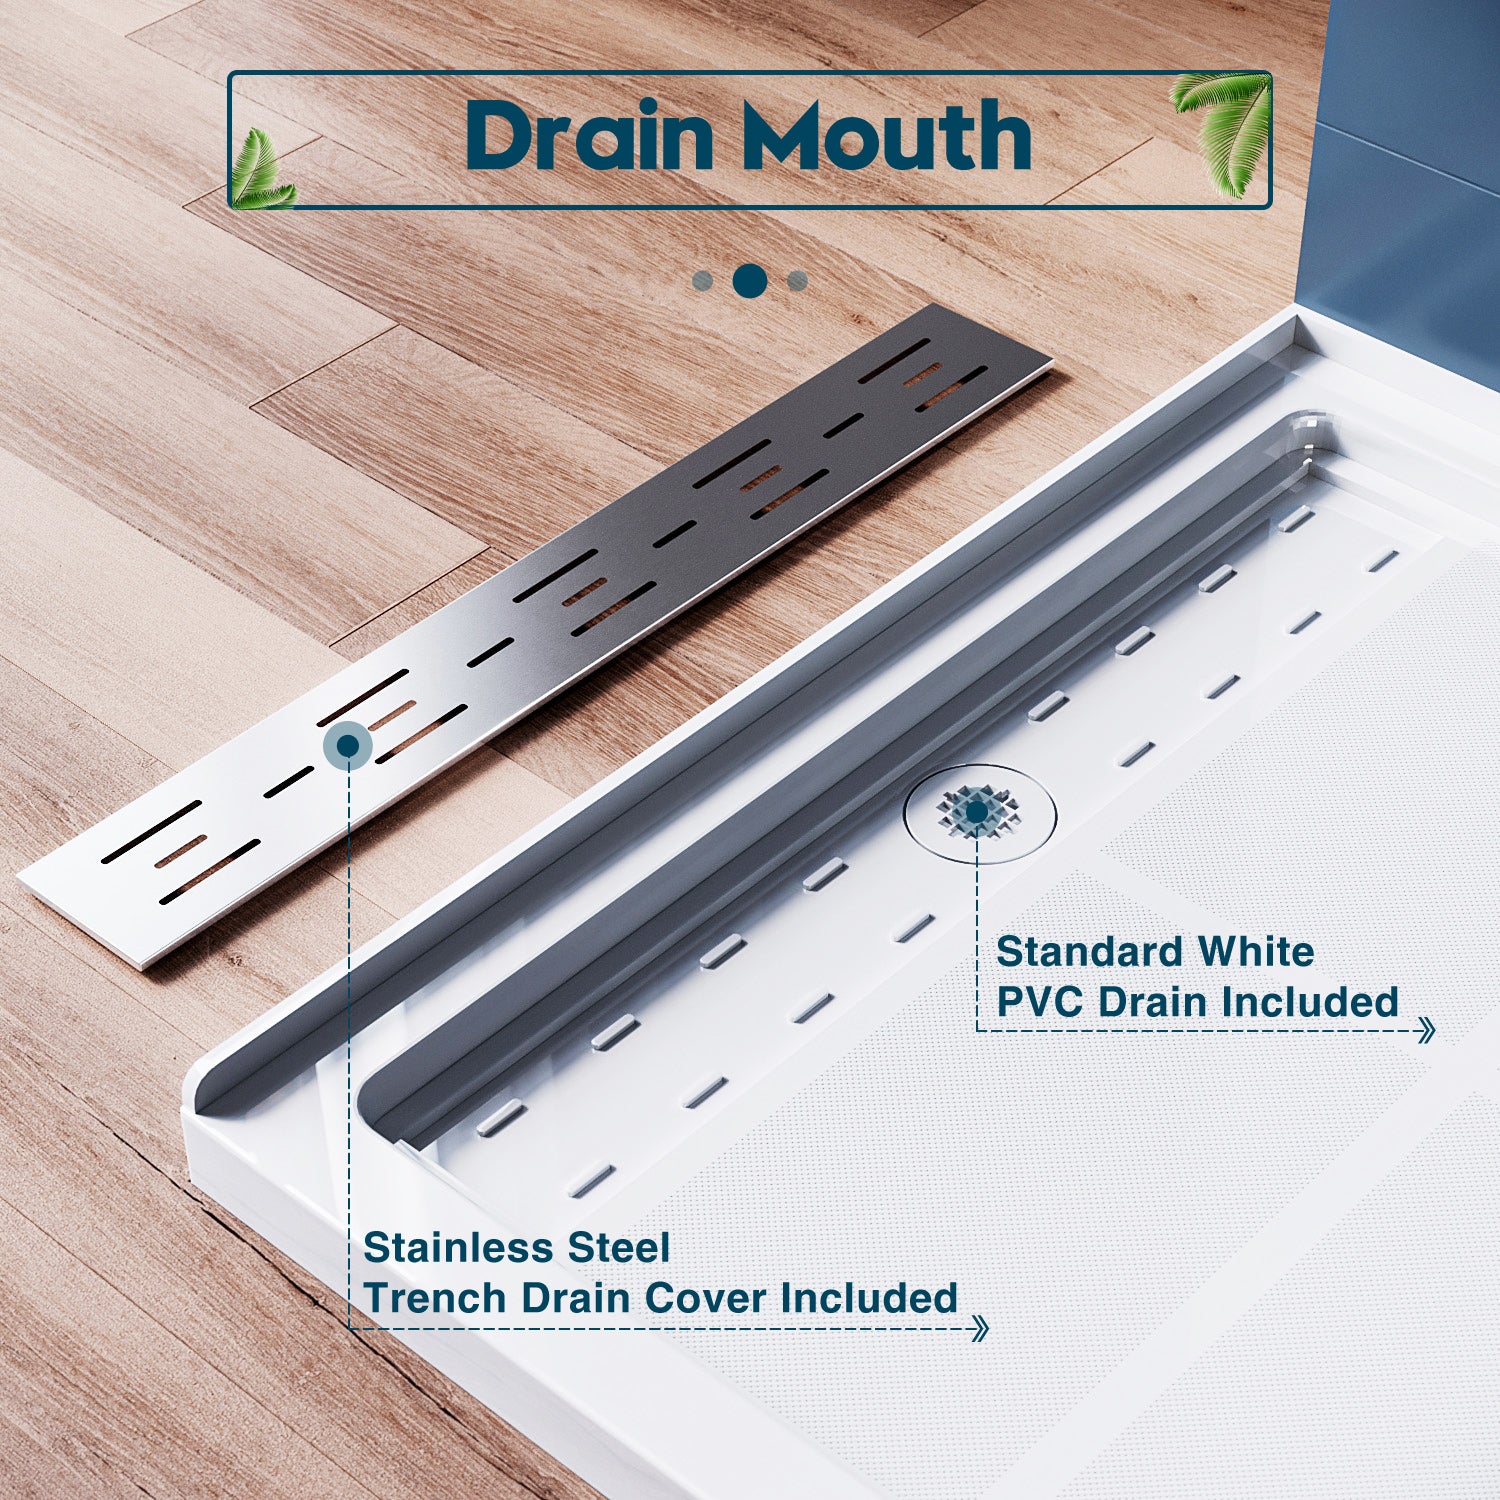 Drain mouth（stainless steel trench drain cover included）（standard white pvc drain included）